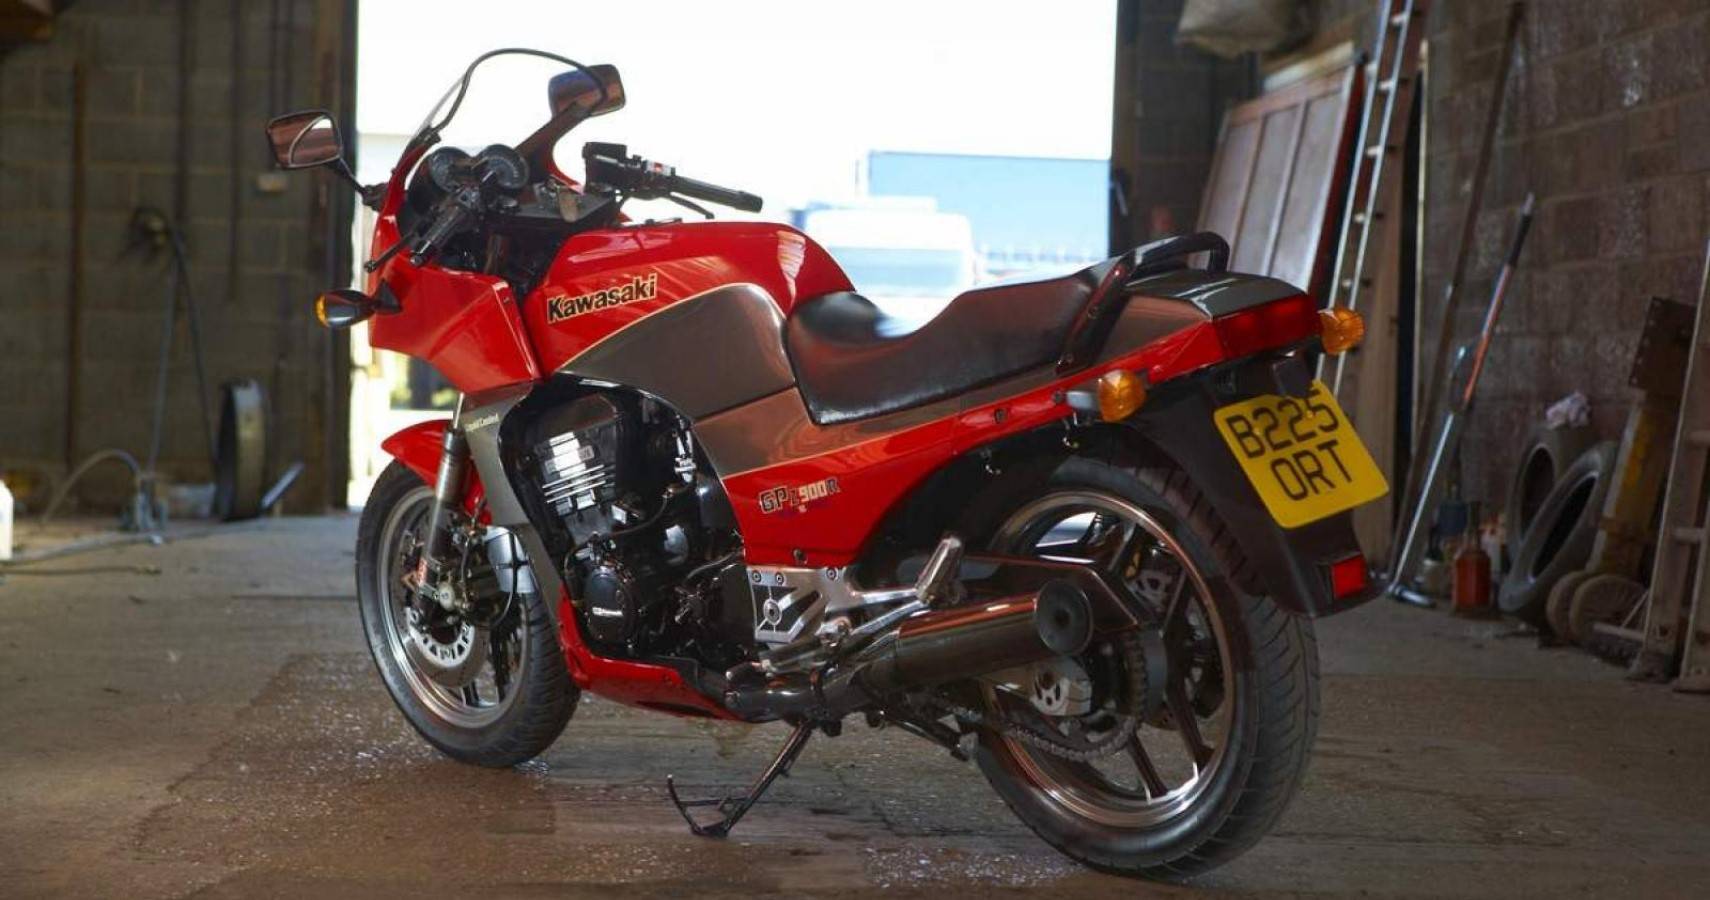 What Made The Kawasaki GPZ900R Special